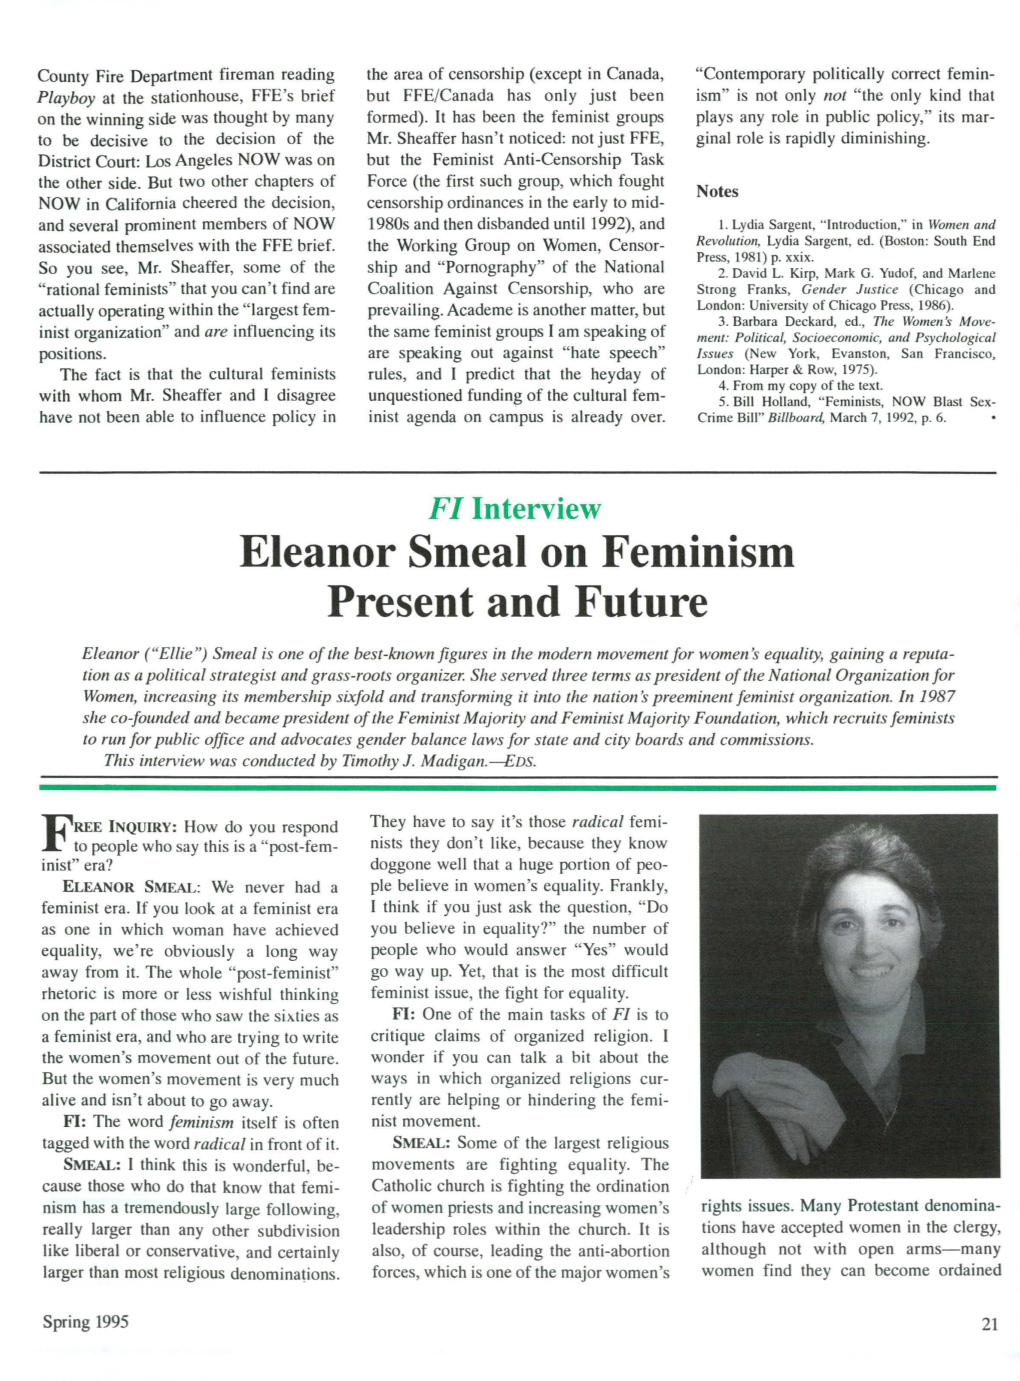 Eleanor Smeal on Feminism Present and Future